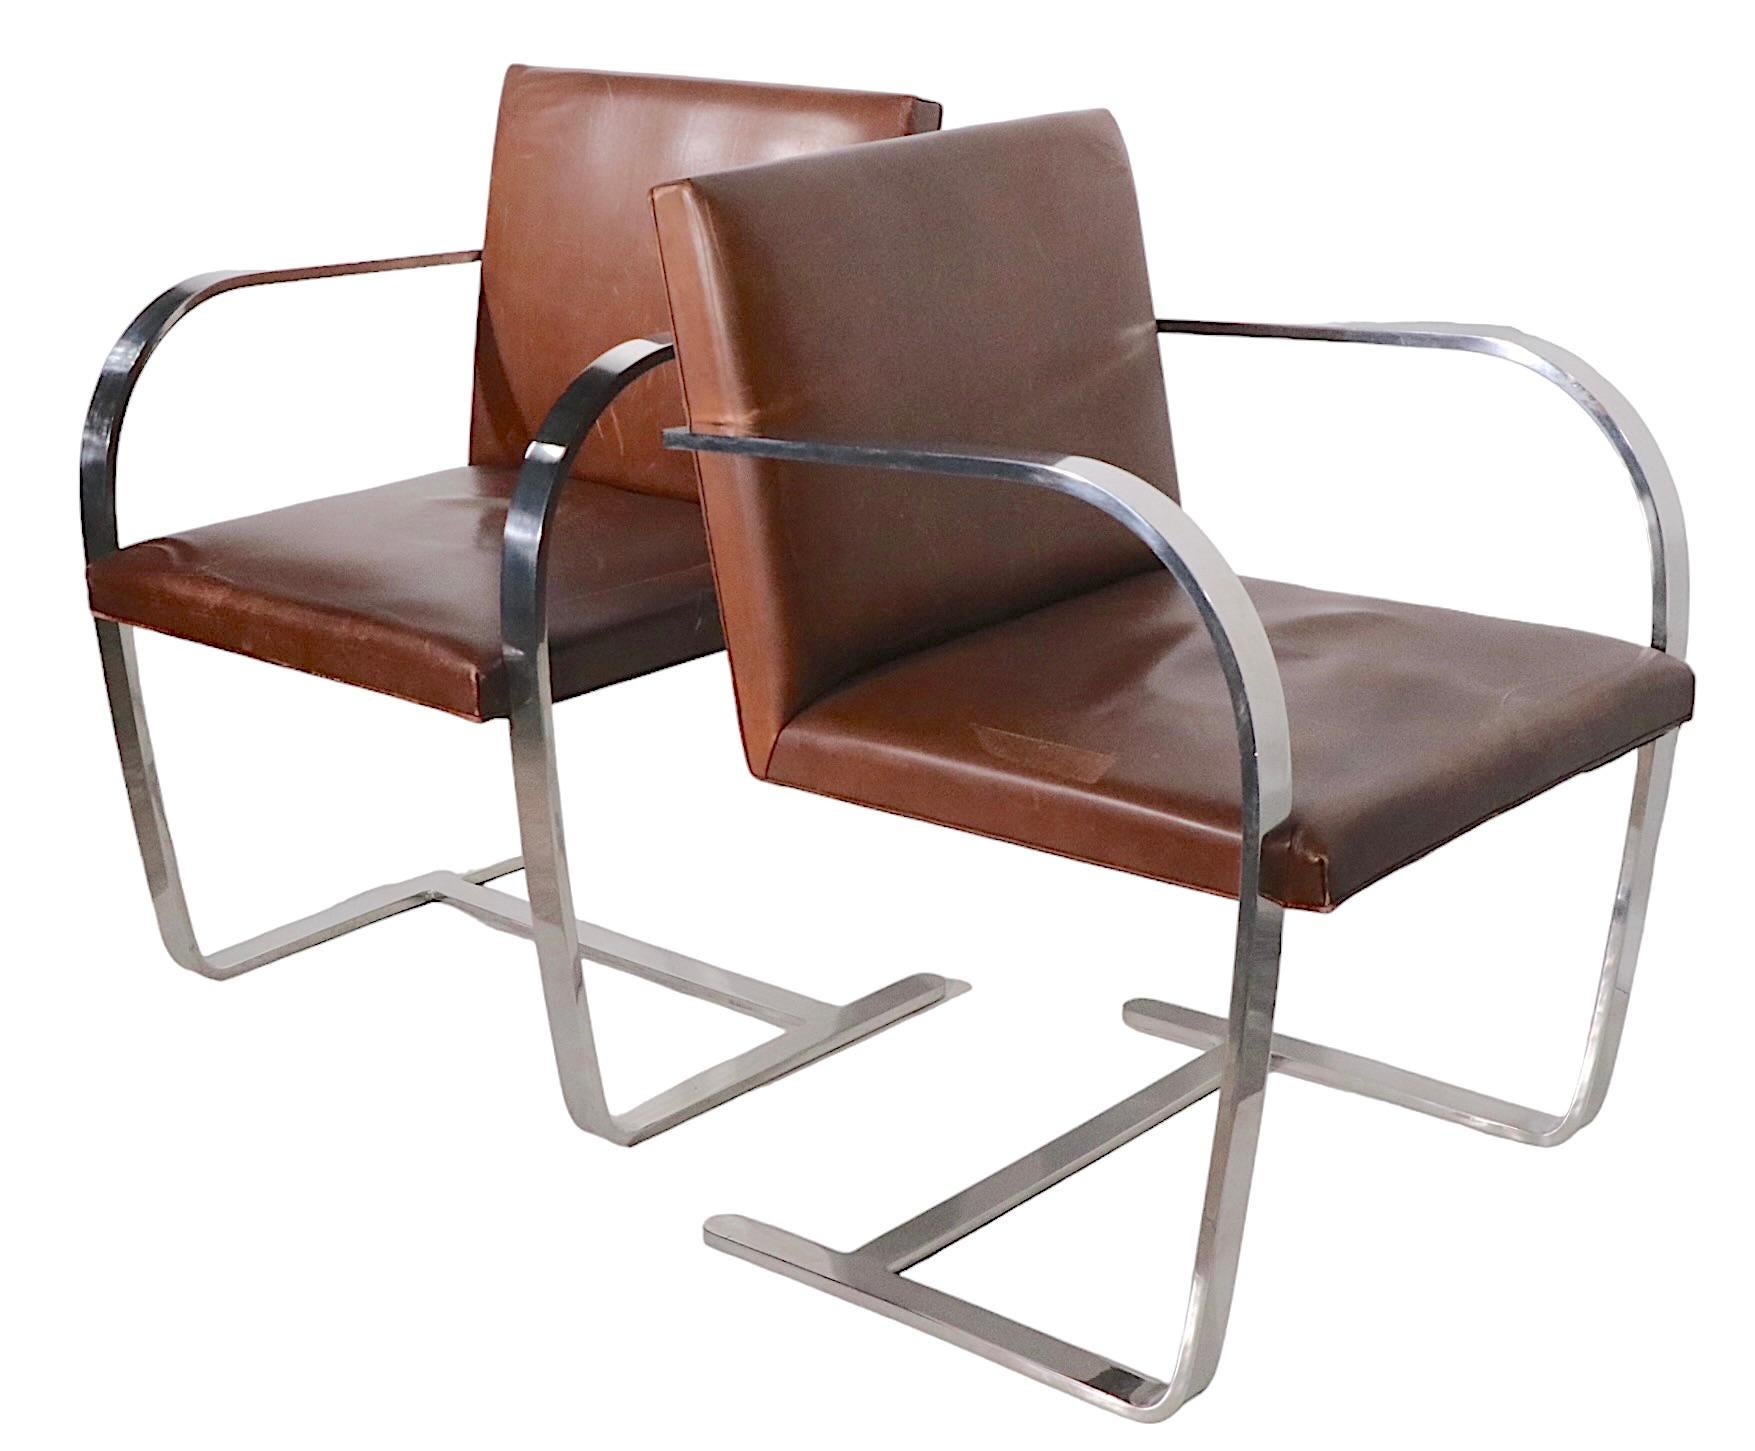 20th Century Pr. Meis Van Der Rohe Designed Brno Chairs by Knoll in Brown Leather